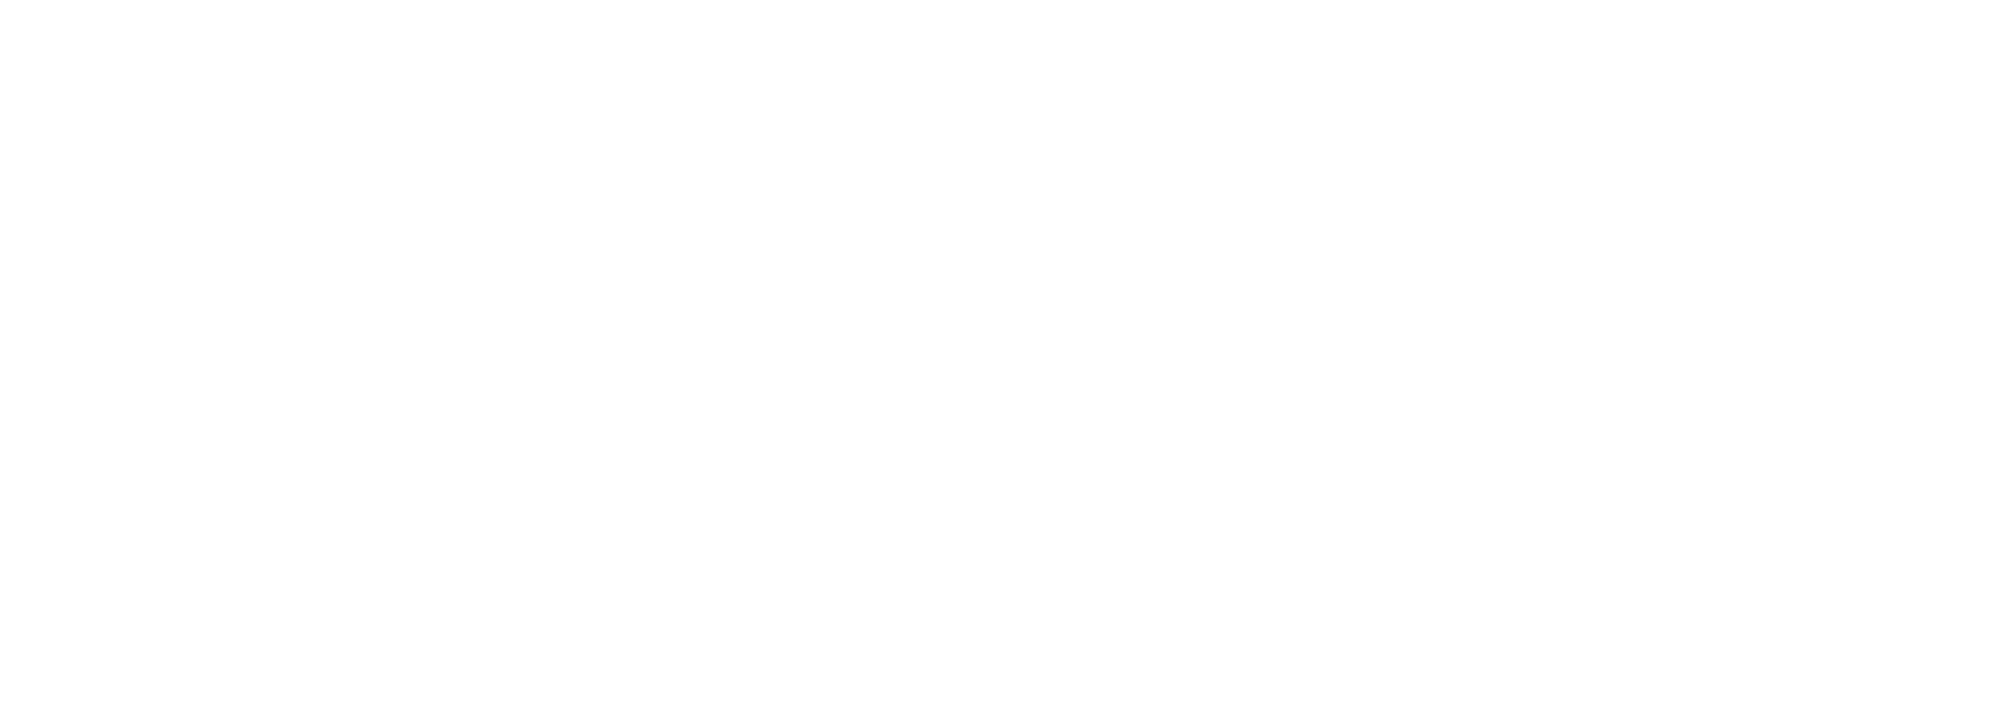 talent-acquisition-icon-pattern